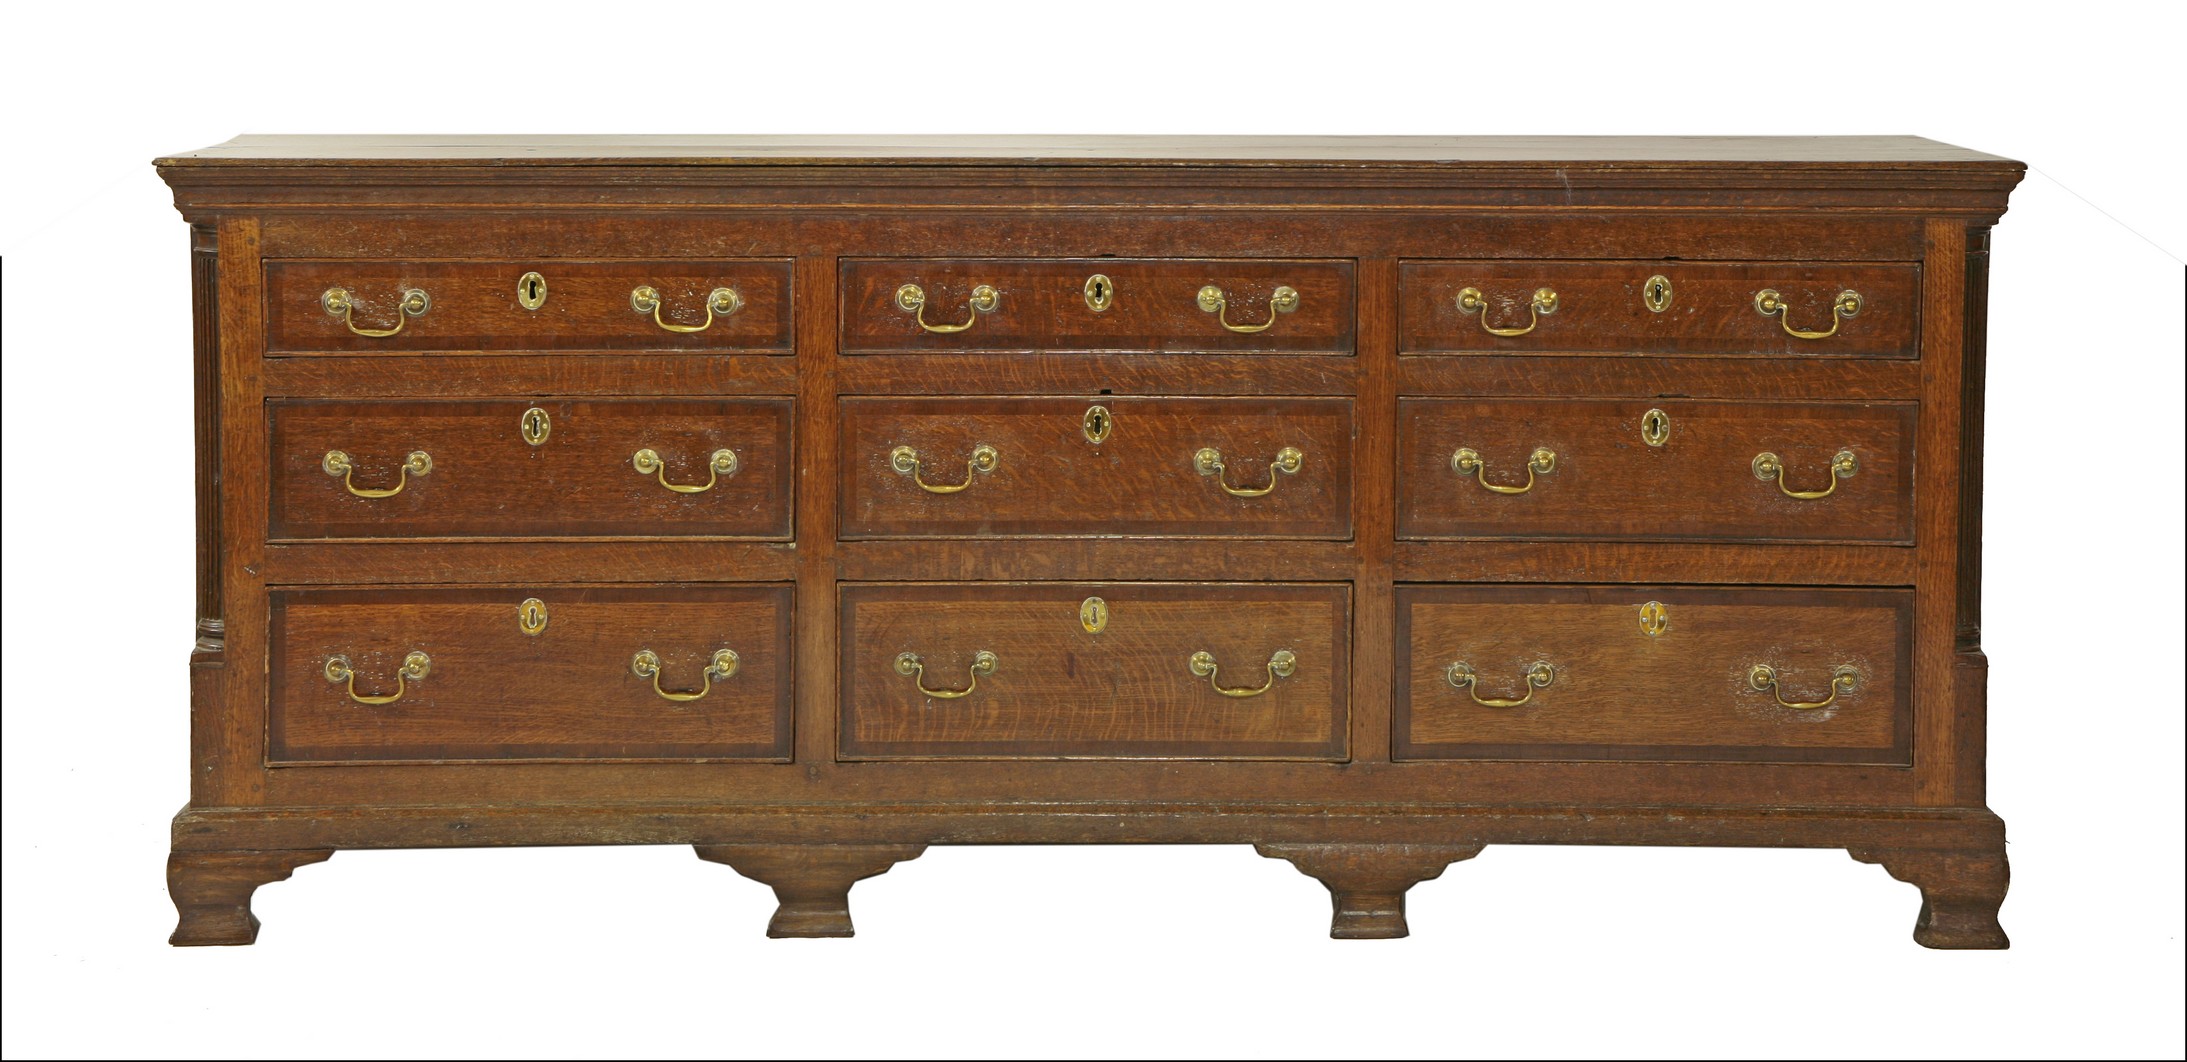 A George III oak Lancashire chest,
with an arrangement of nine drawers, with mahogany